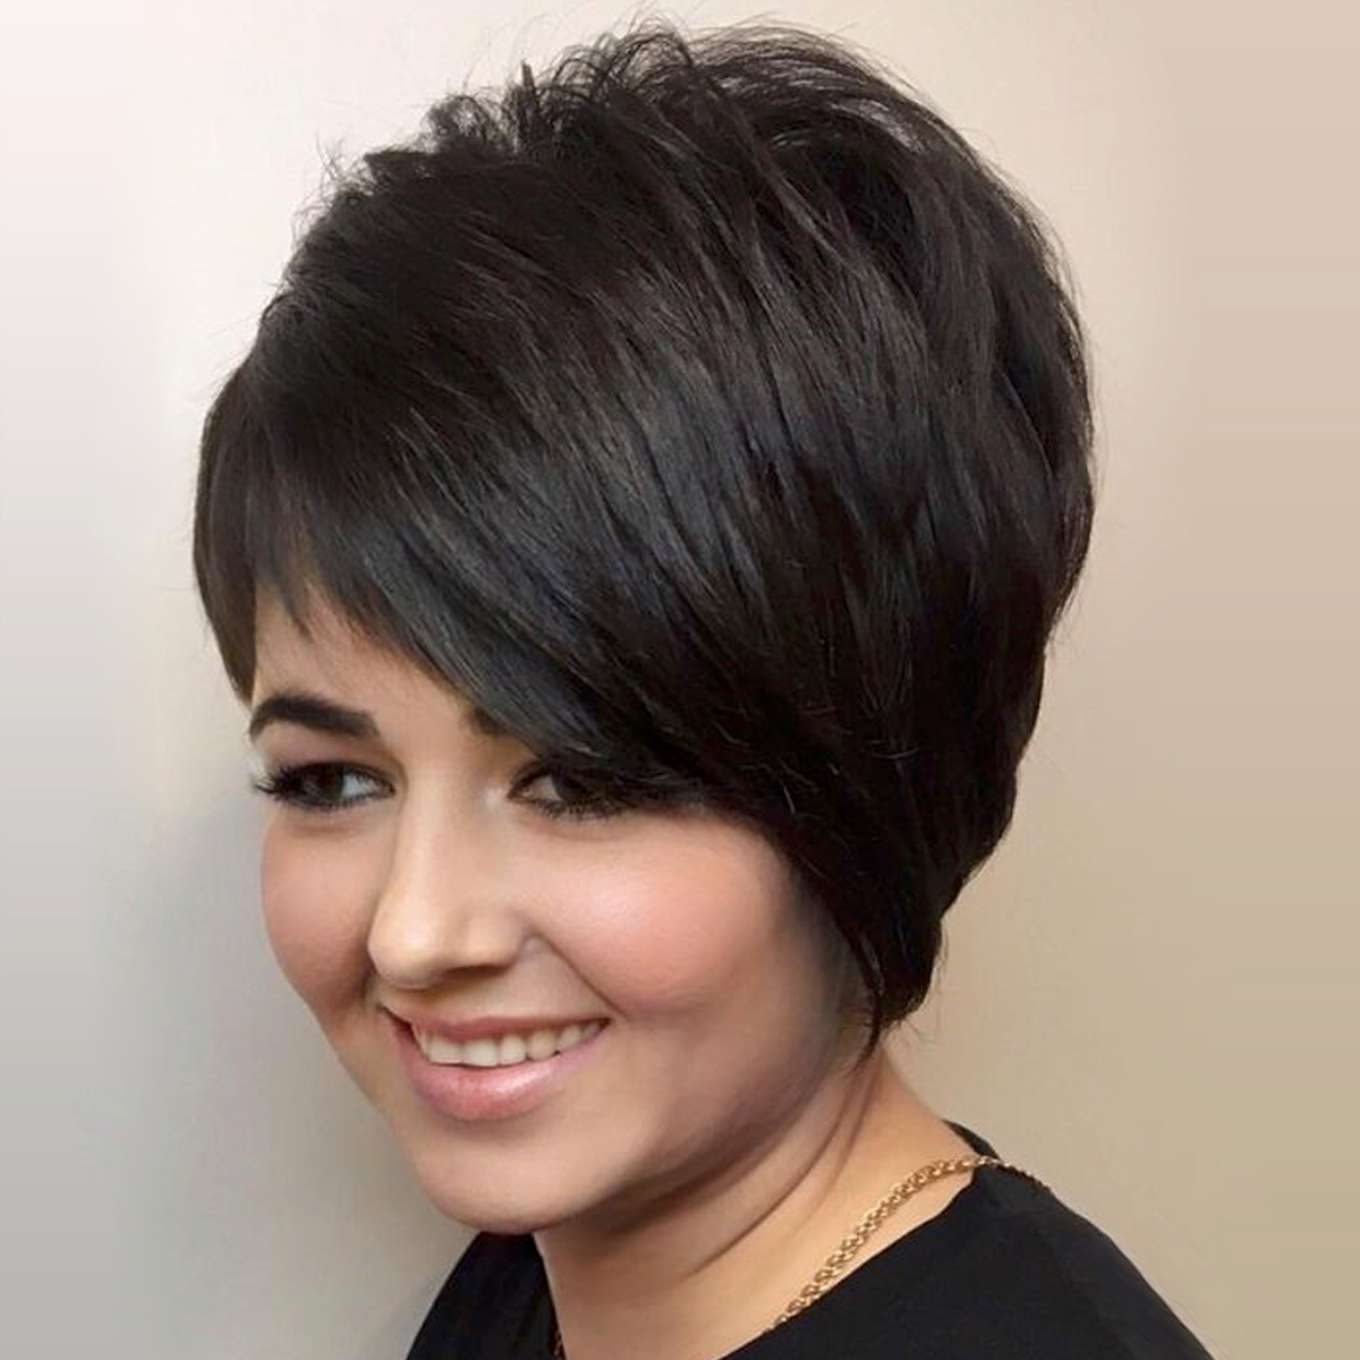 Claudine Nelson Short Hairstyles - Likeeed